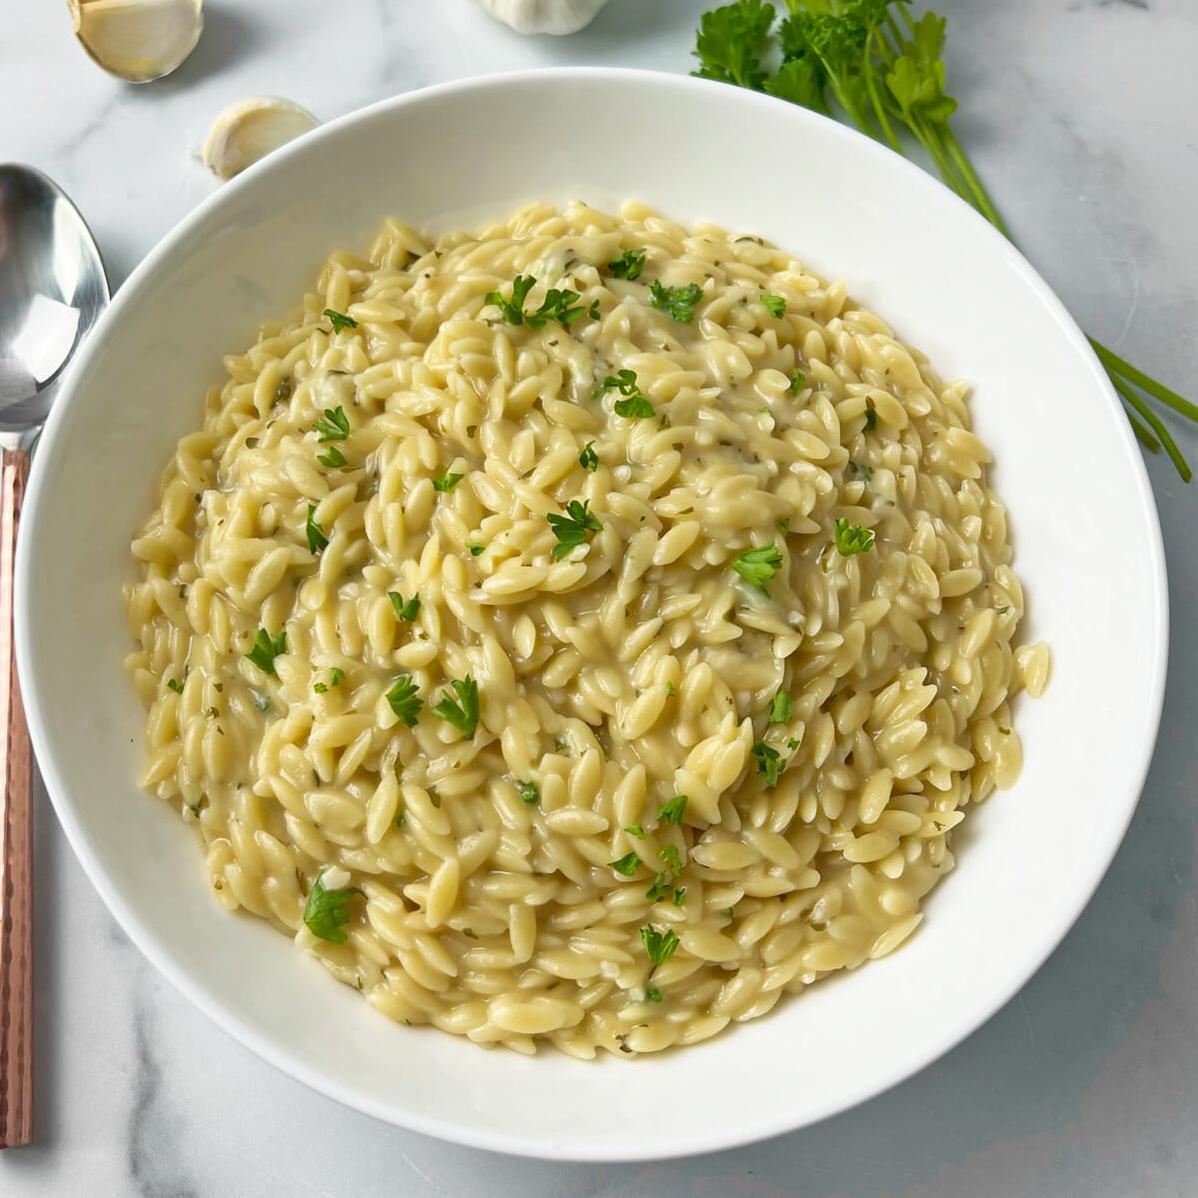  All aboard the Instant Pot train, next stop: Orzo town!